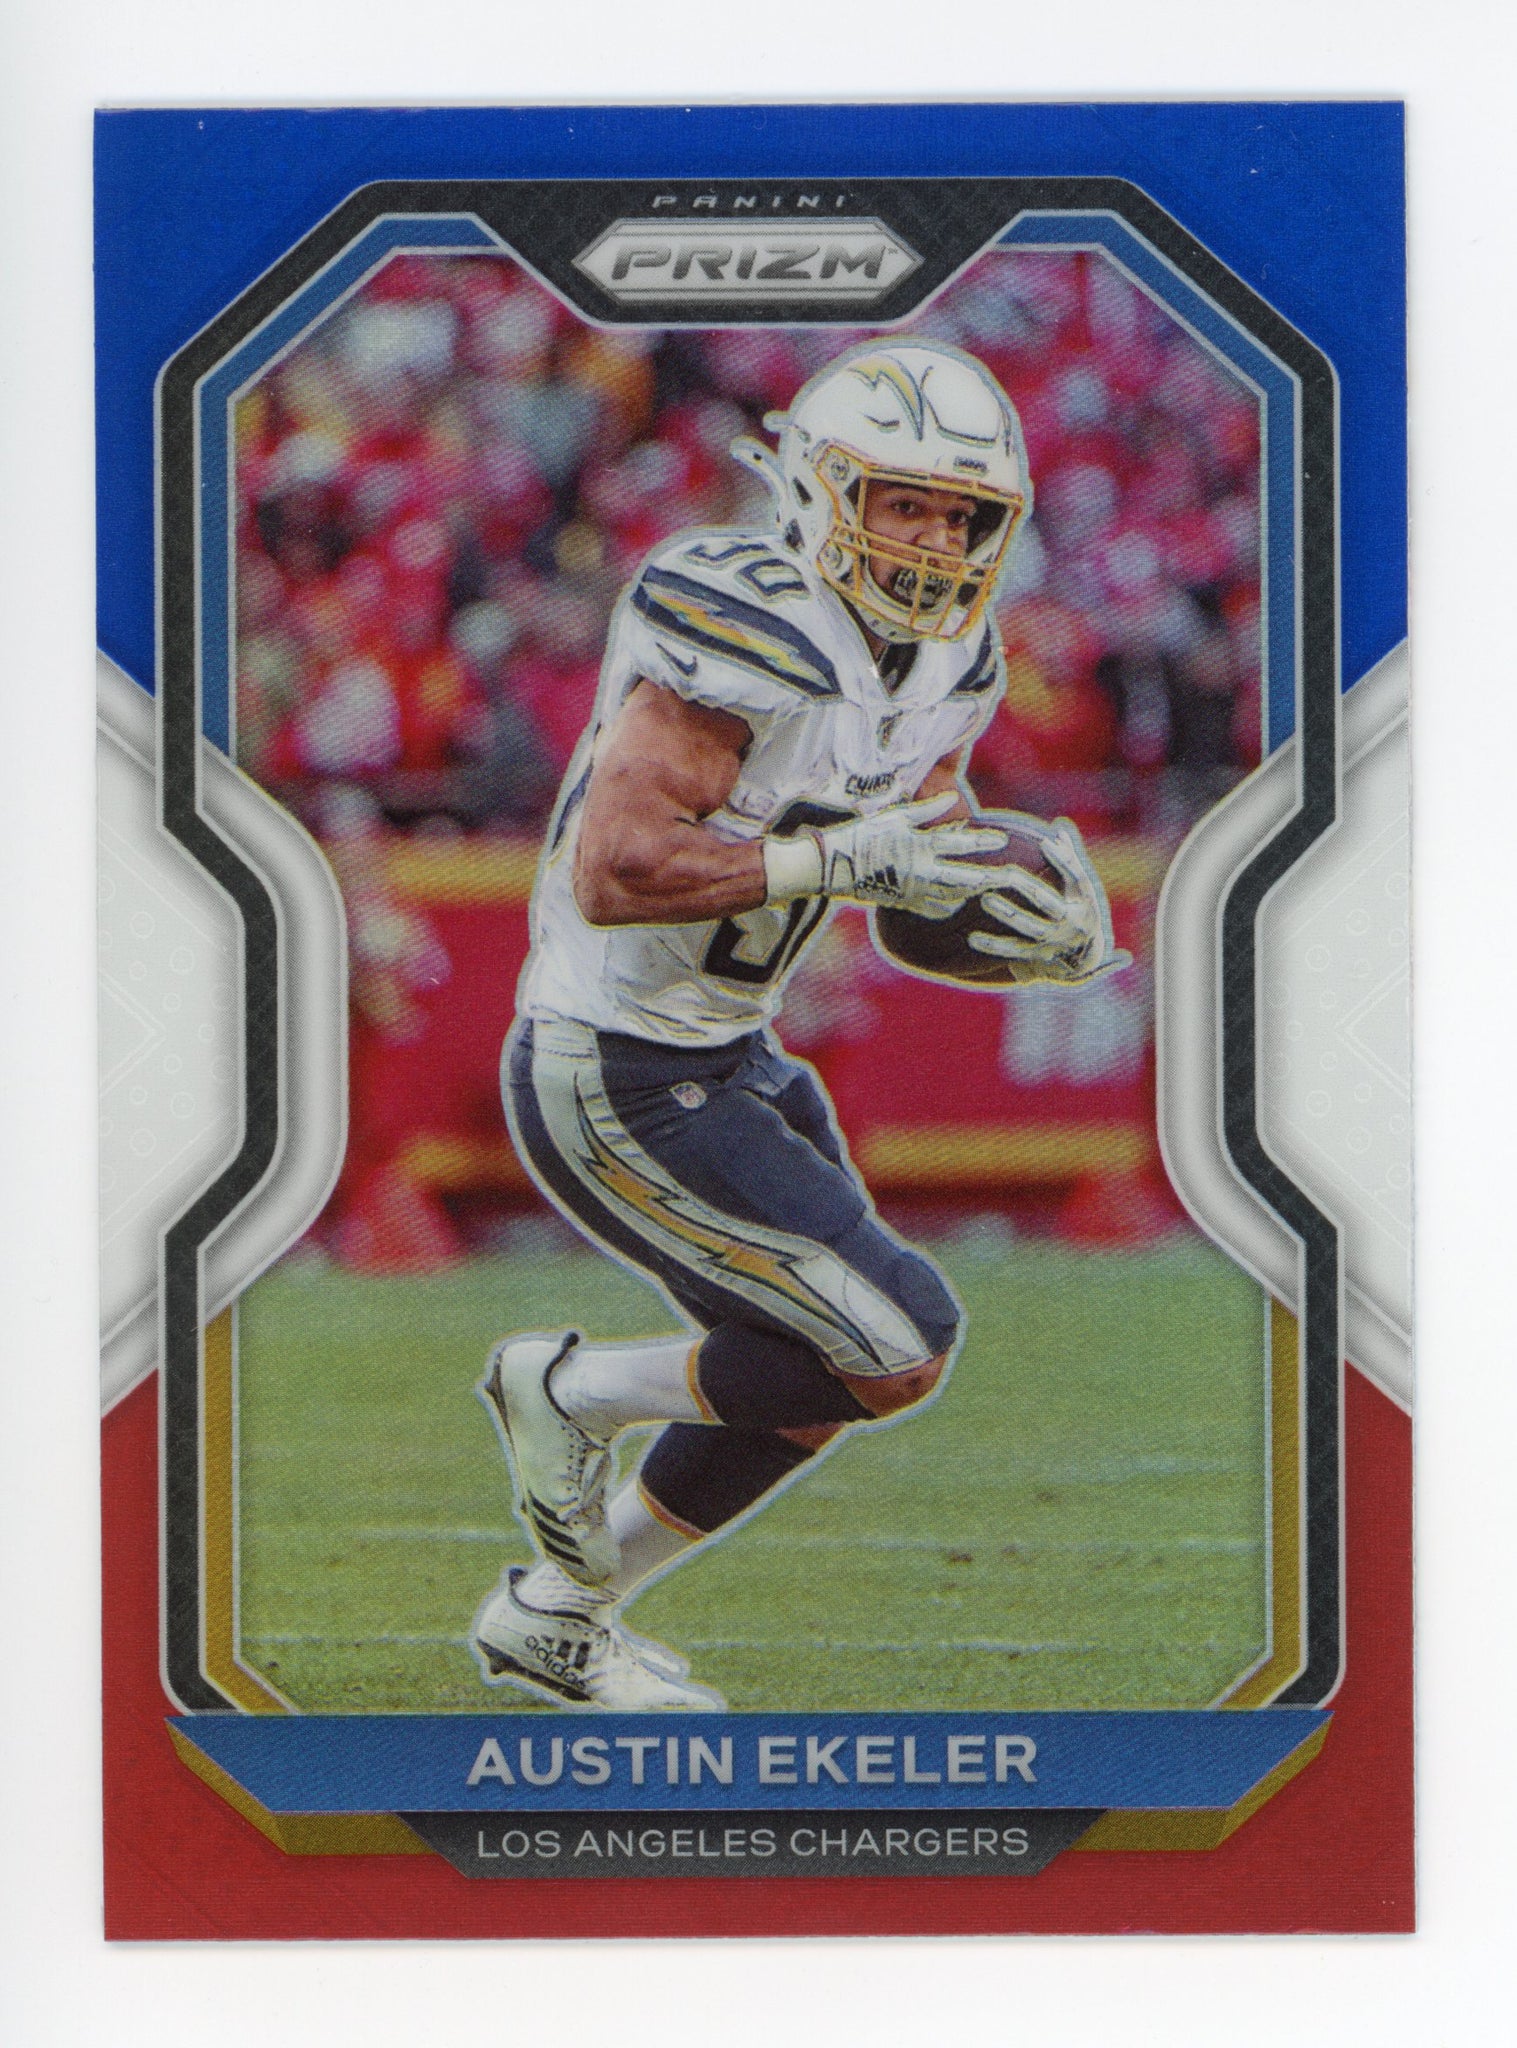 2020 Panini Prizm Austin Ekeler Red White And Blue Los Angeles Chargers # 142